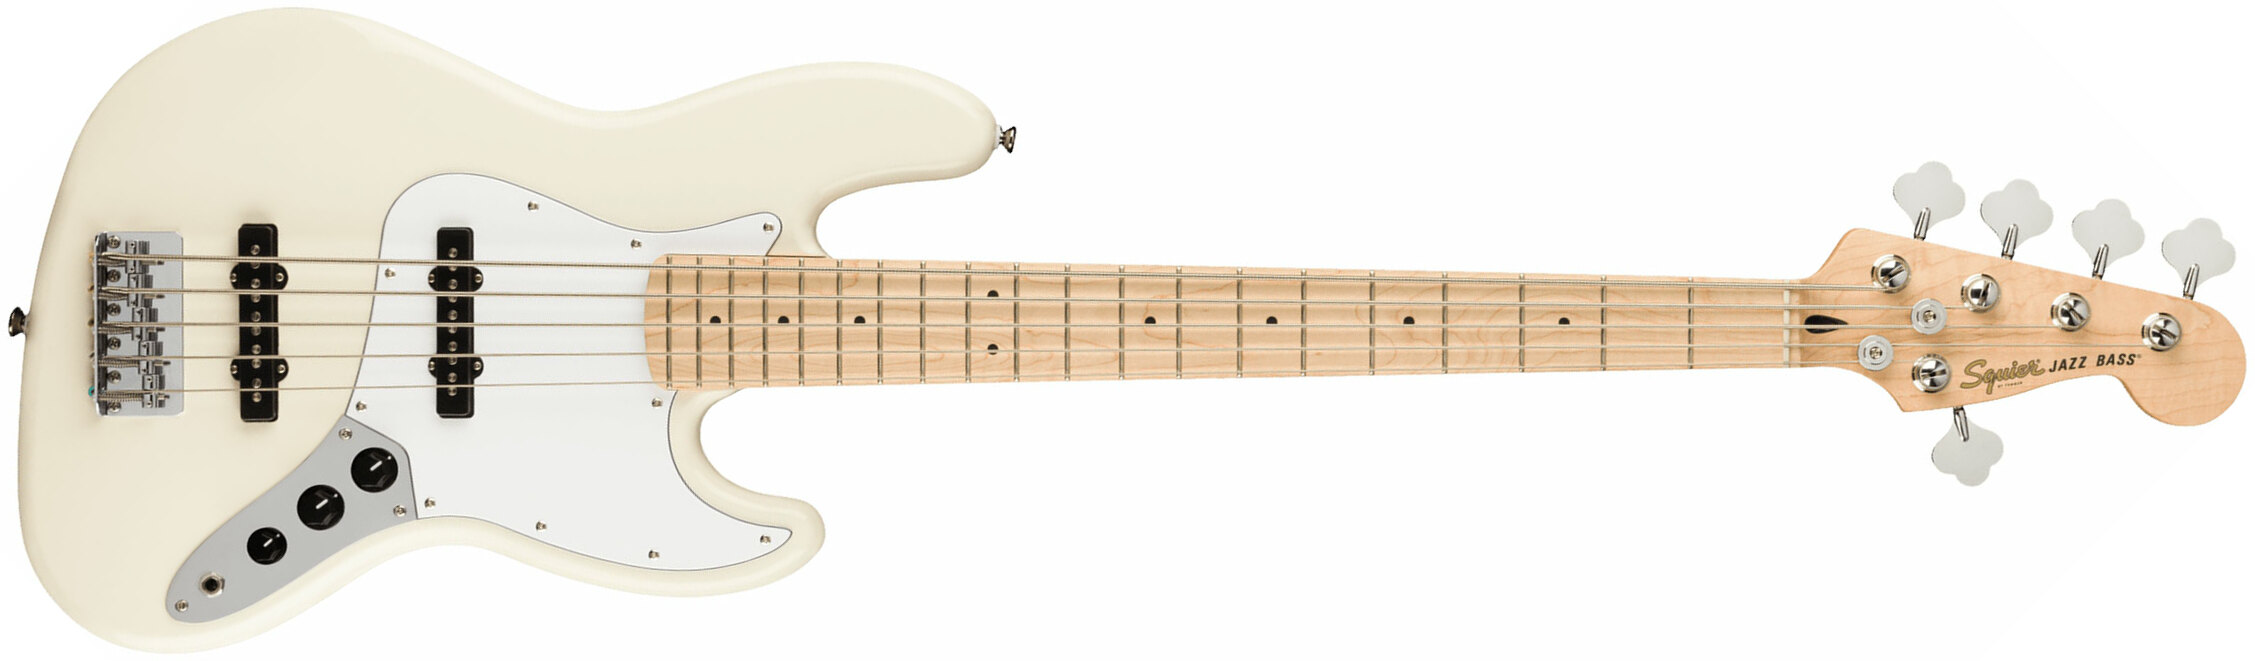 Squier Jazz Bass Affinity V 2021 5-cordes Mn - Olympic White - Solid body elektrische bas - Main picture